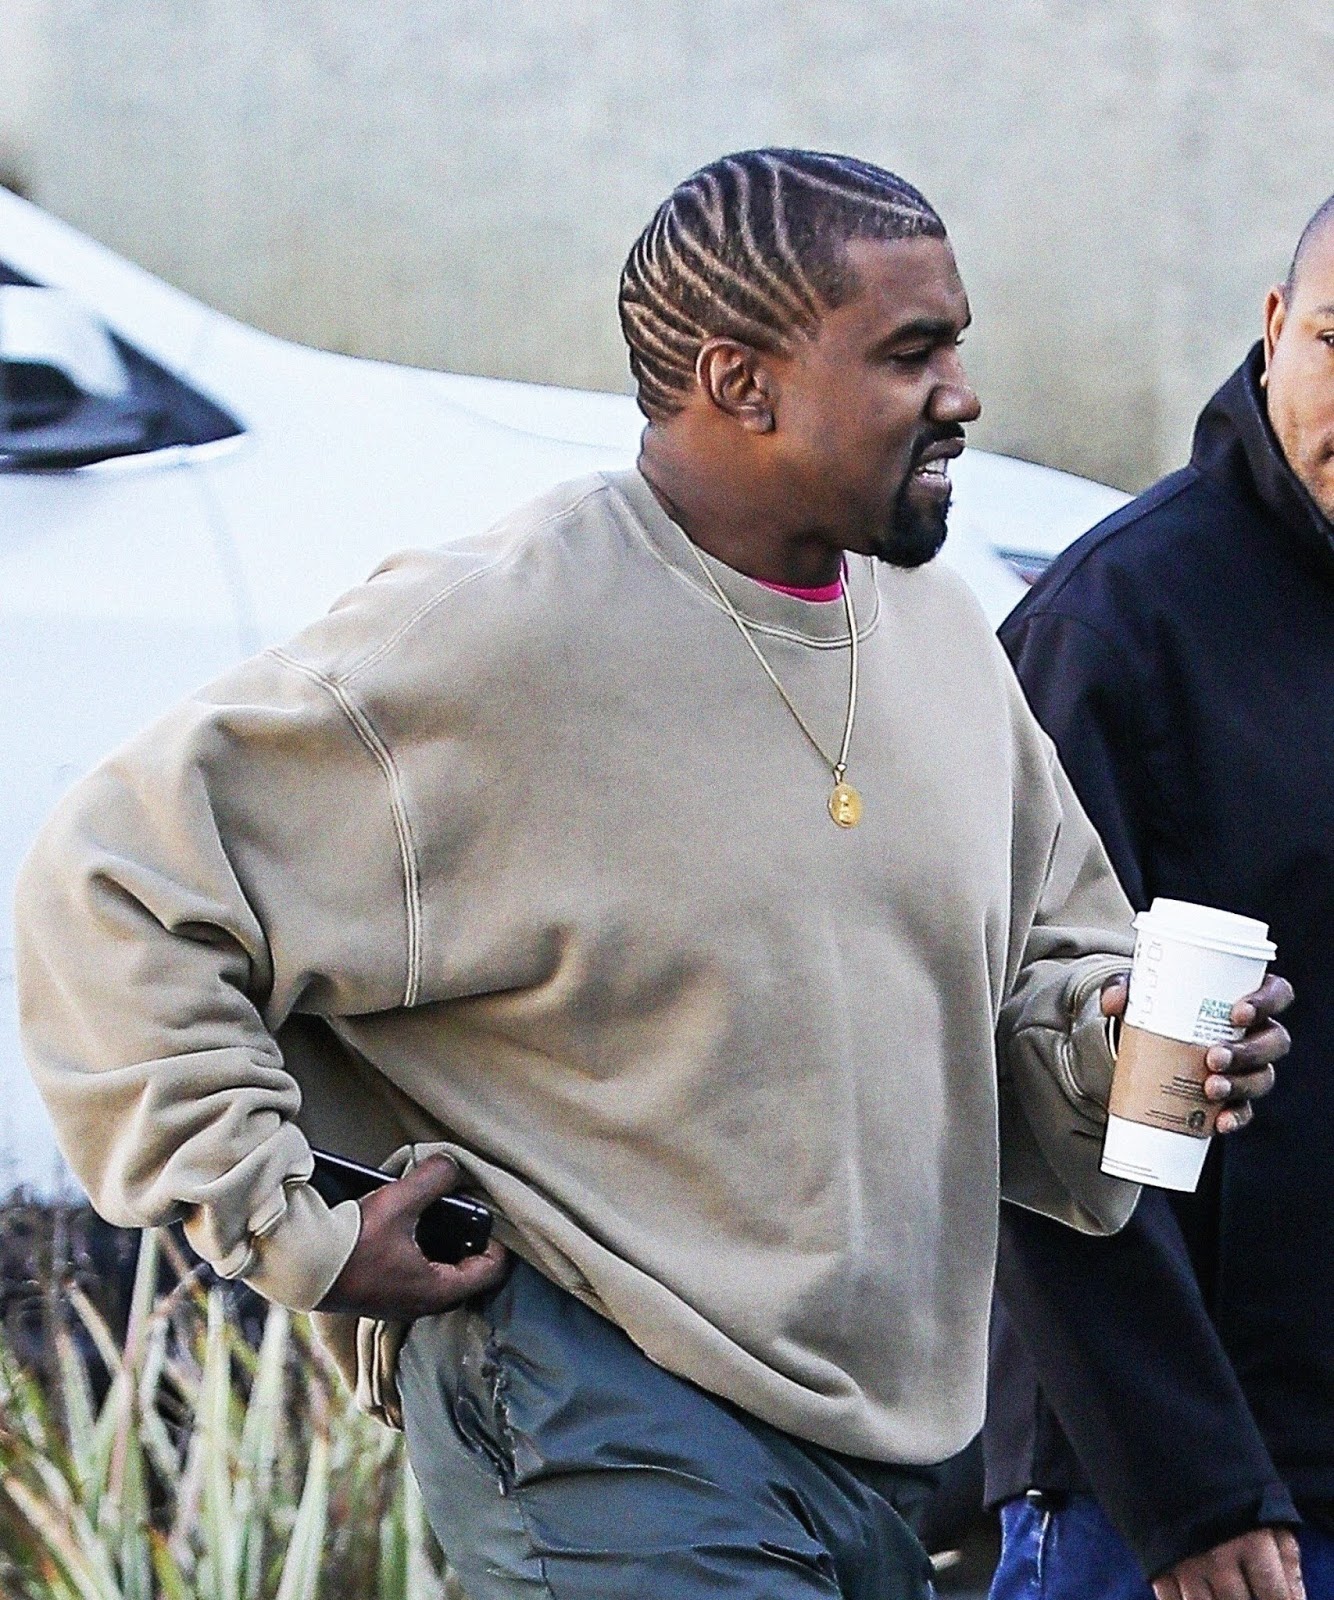 Check Out Kanye West's New Hairstyle Which Reportedly Costs N180k To Maintain Daily [Photos] 1